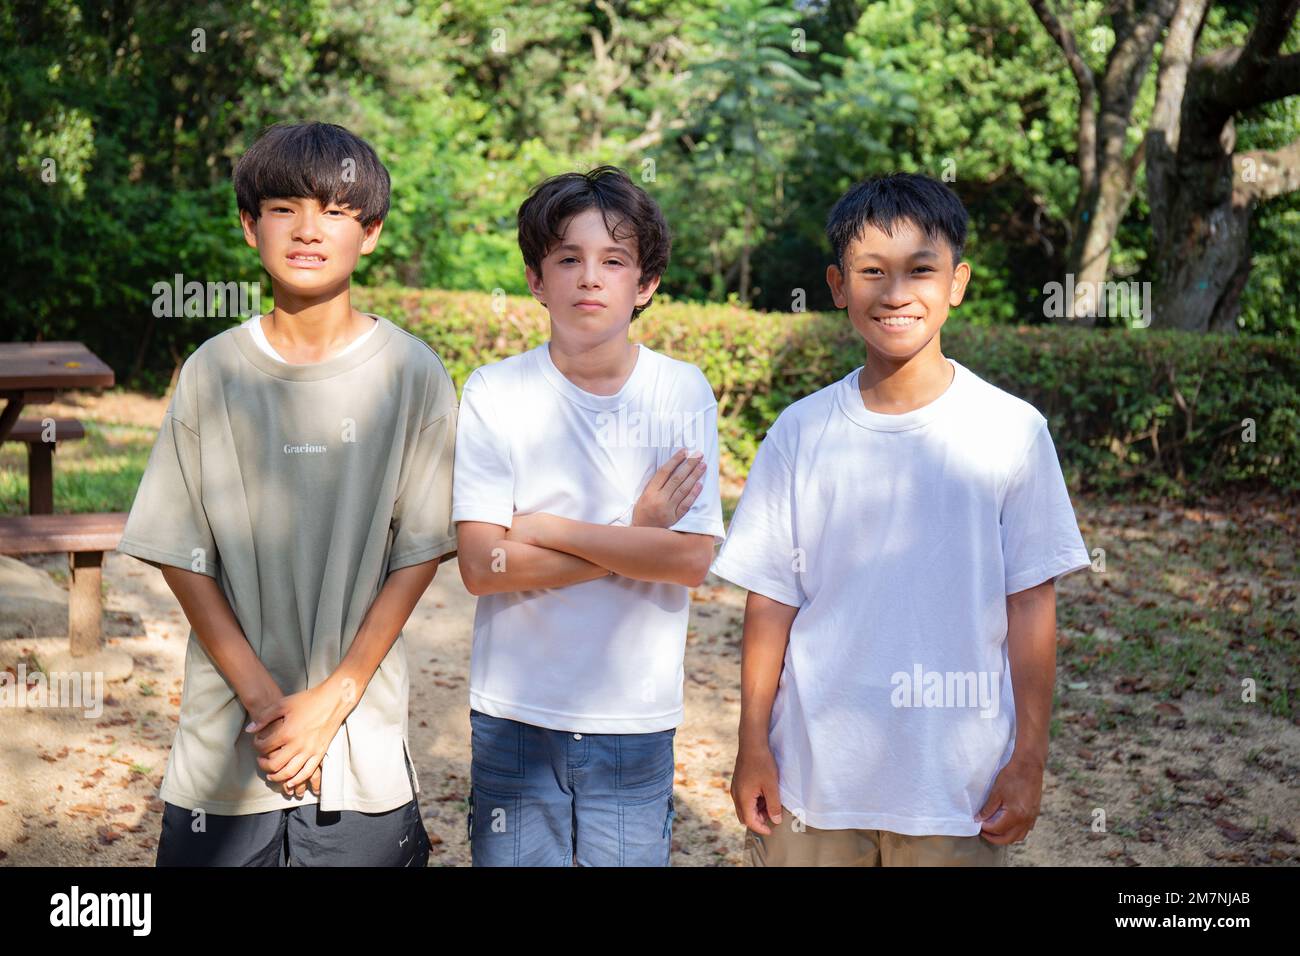 Three boys in a row, outdoors in the part in summer. Stock Photo